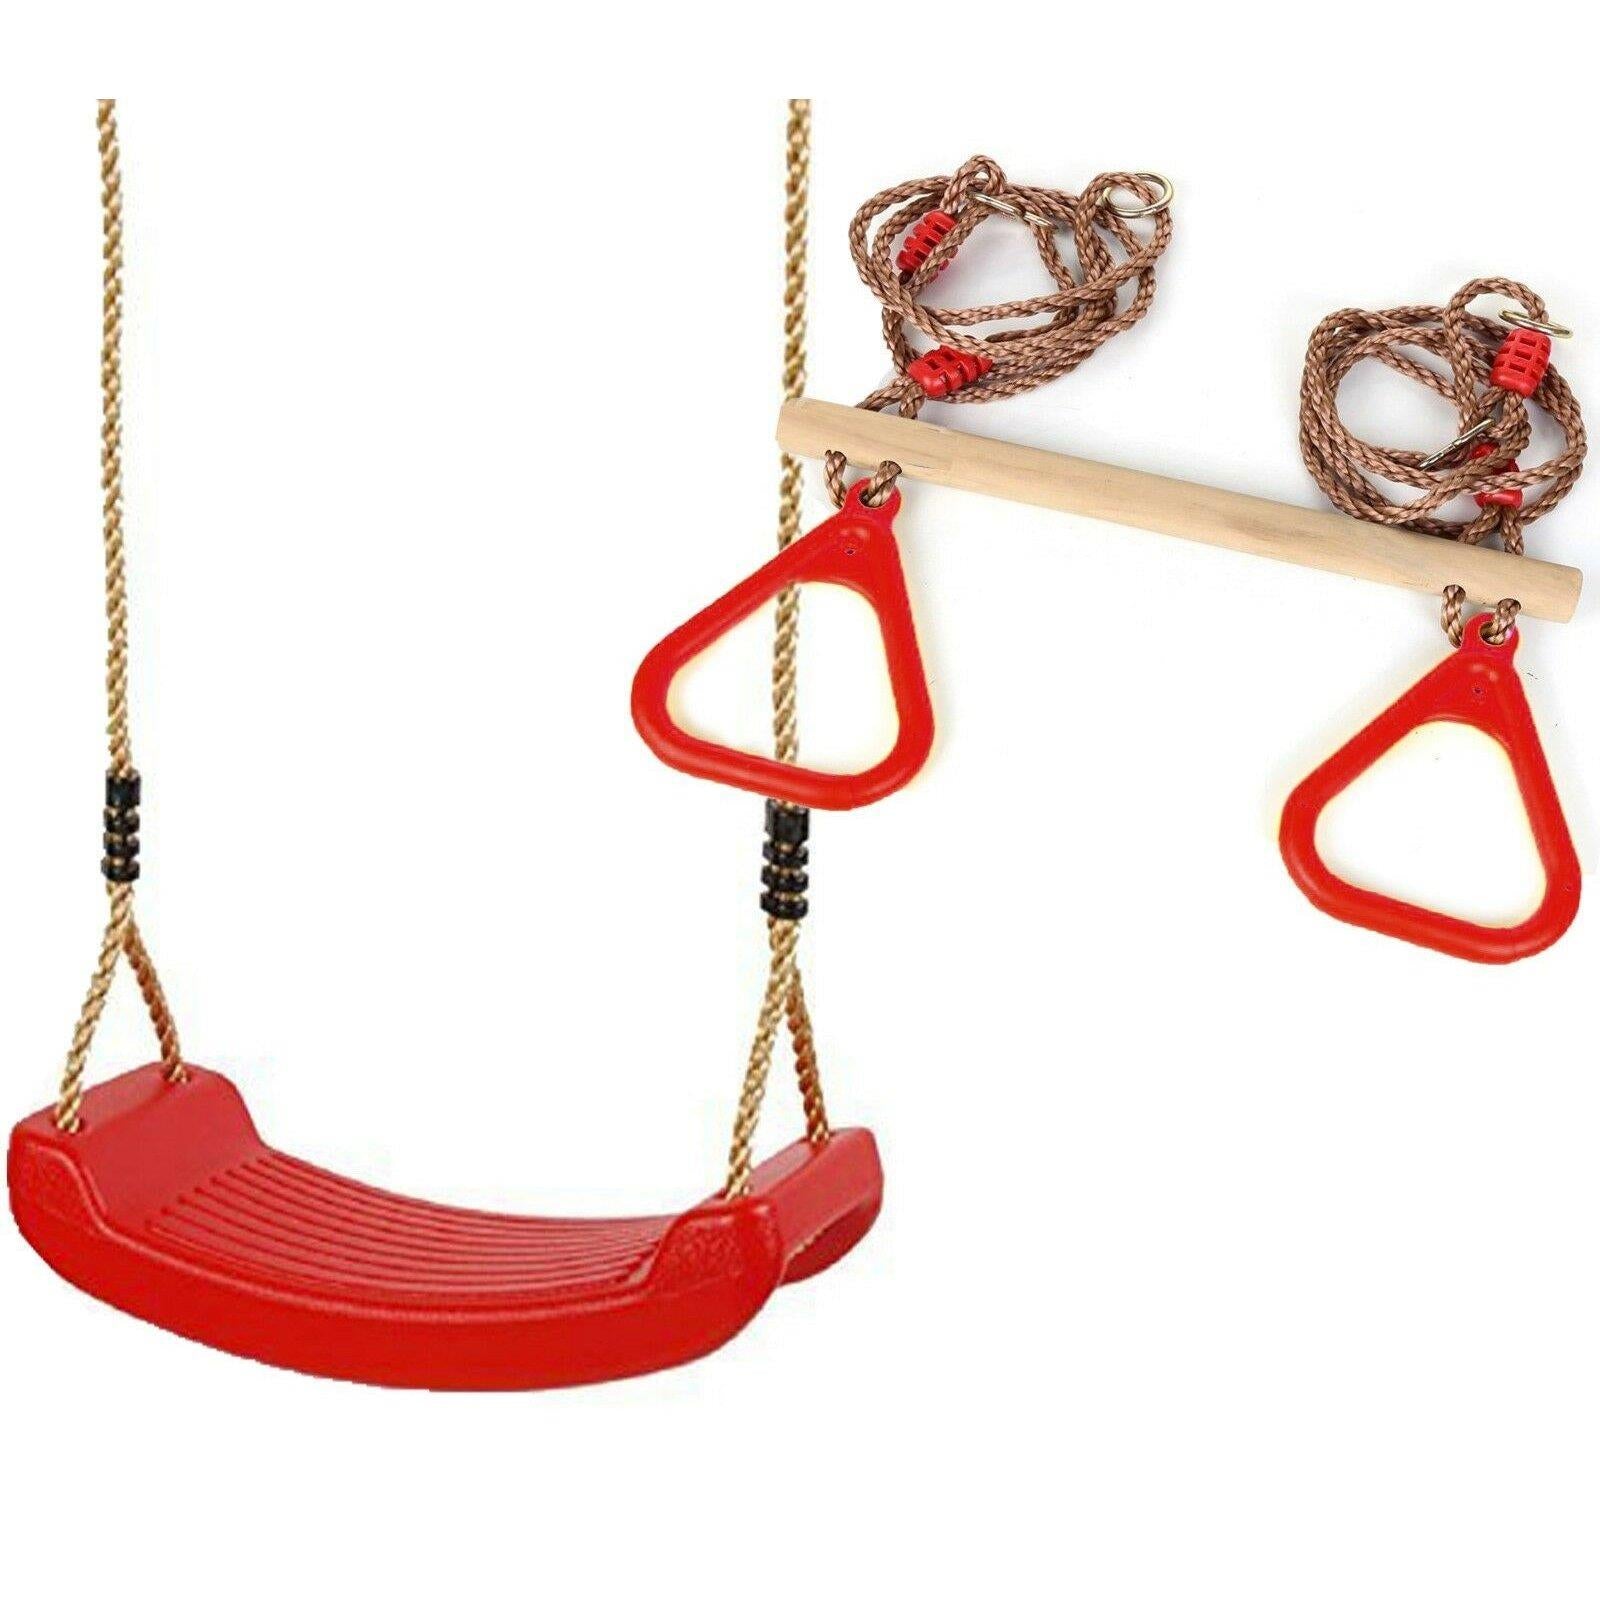 The Magic Toy Shop Toys and Games Set of Trapeze Monkey Bar and Plastic Swing Seat